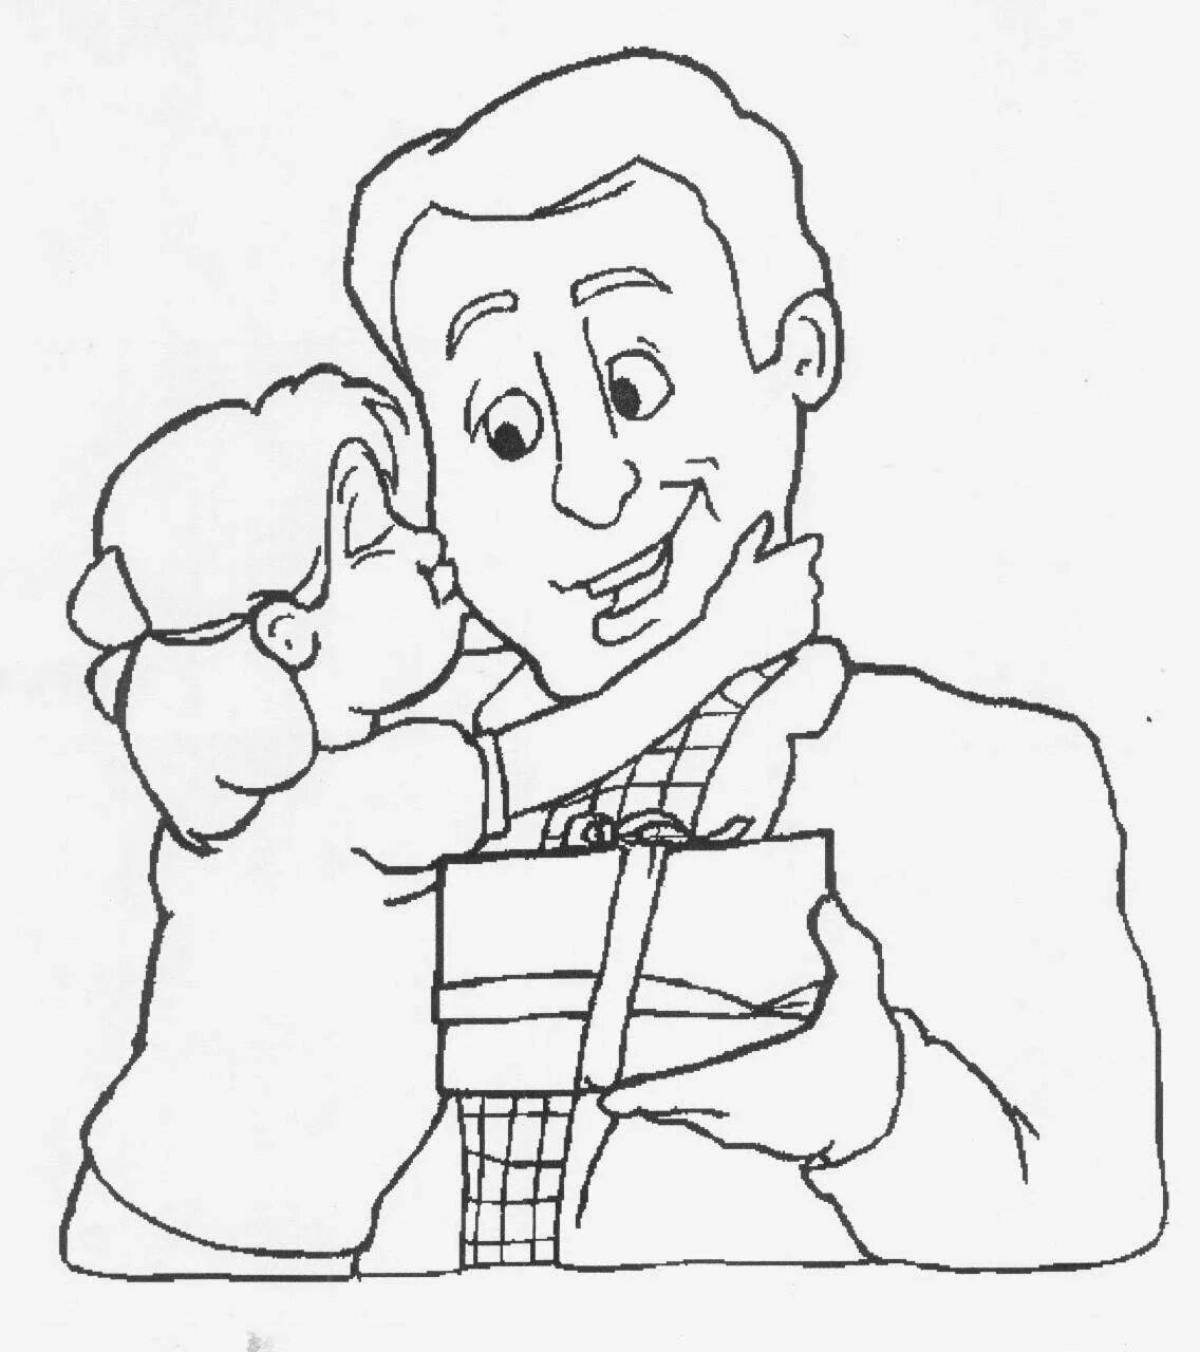 Delightful nastya and dad coloring pages